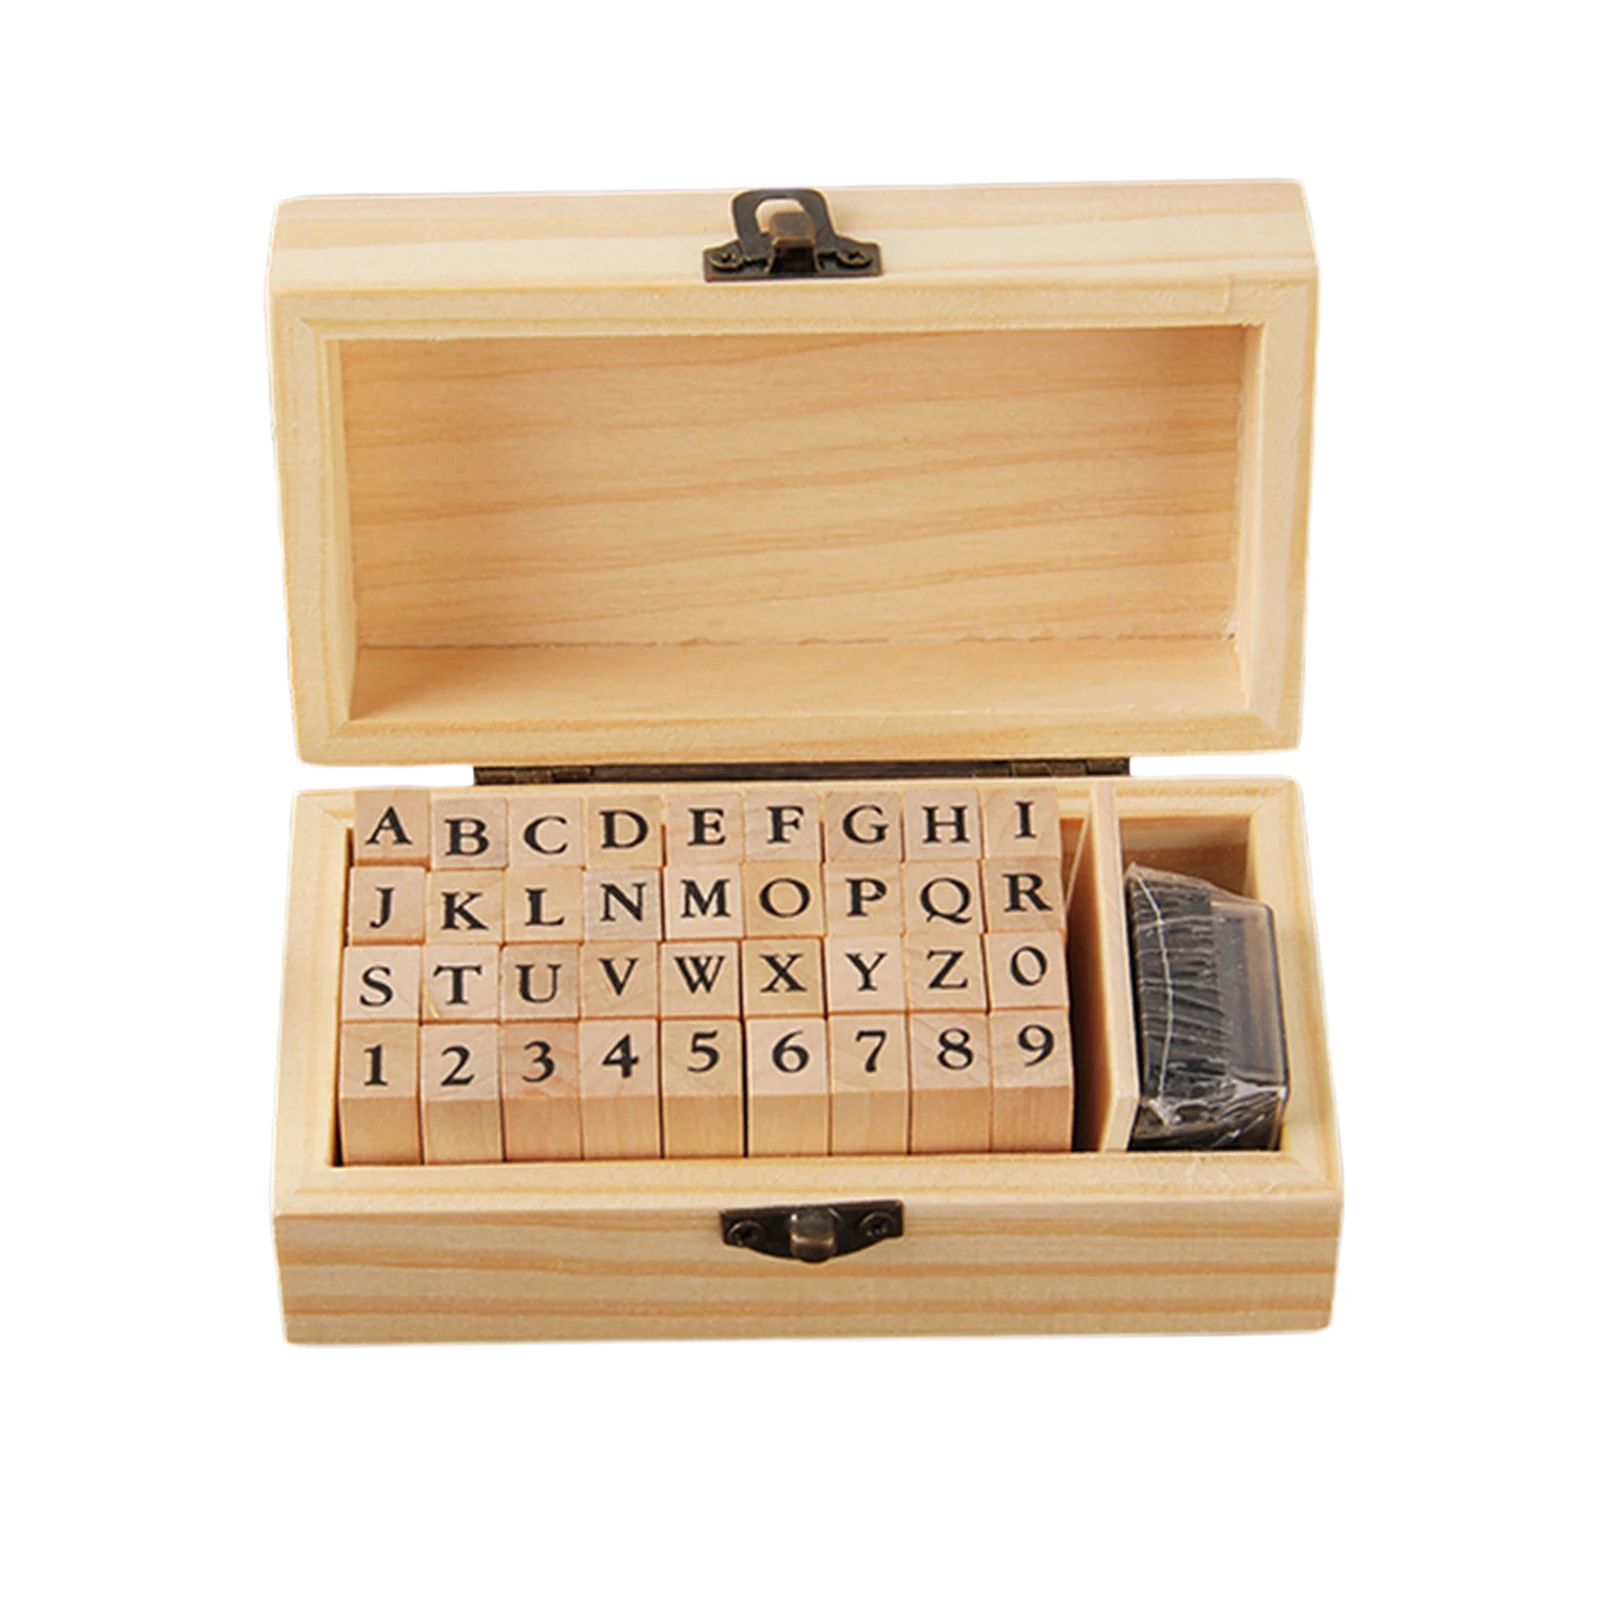 36pcs DIY Number Alphabet Letter Wood Rubber Stamps Set with Wooden Box for Kids Adults DIY Scrapbooking Card Making Stamping